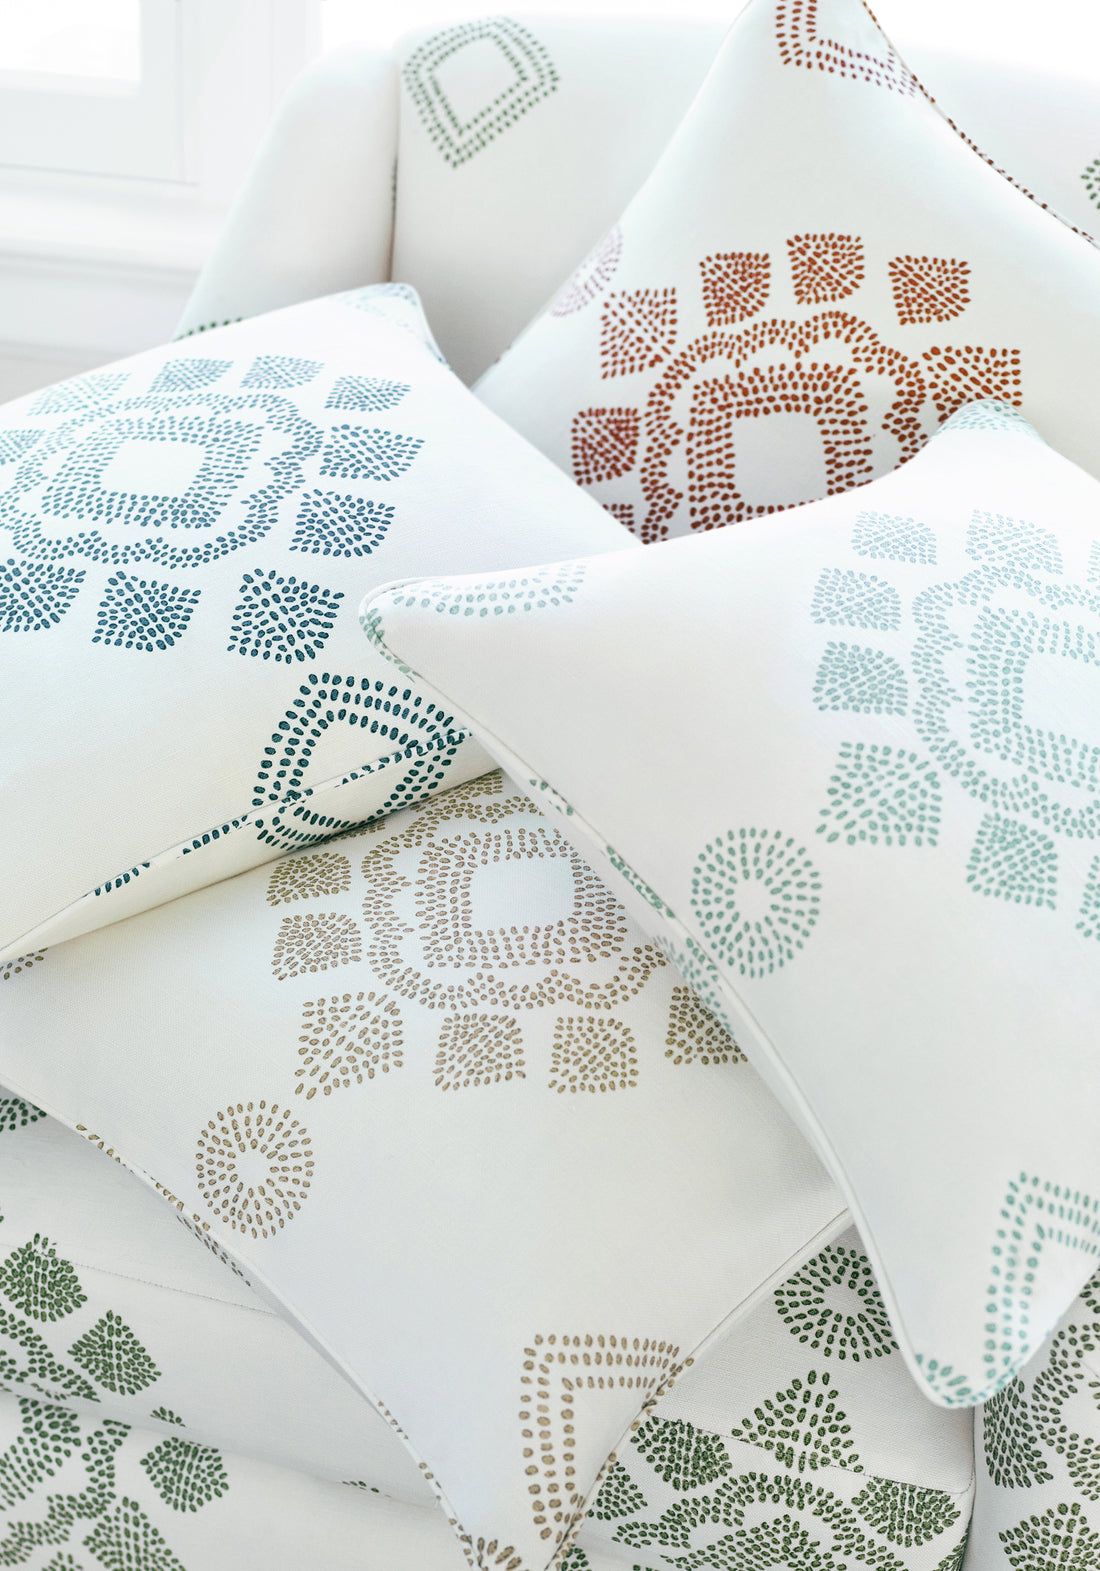 Pillows with Province Medallion fabric in seaglass color - pattern number F981320 - by Thibaut in the Montecito collection